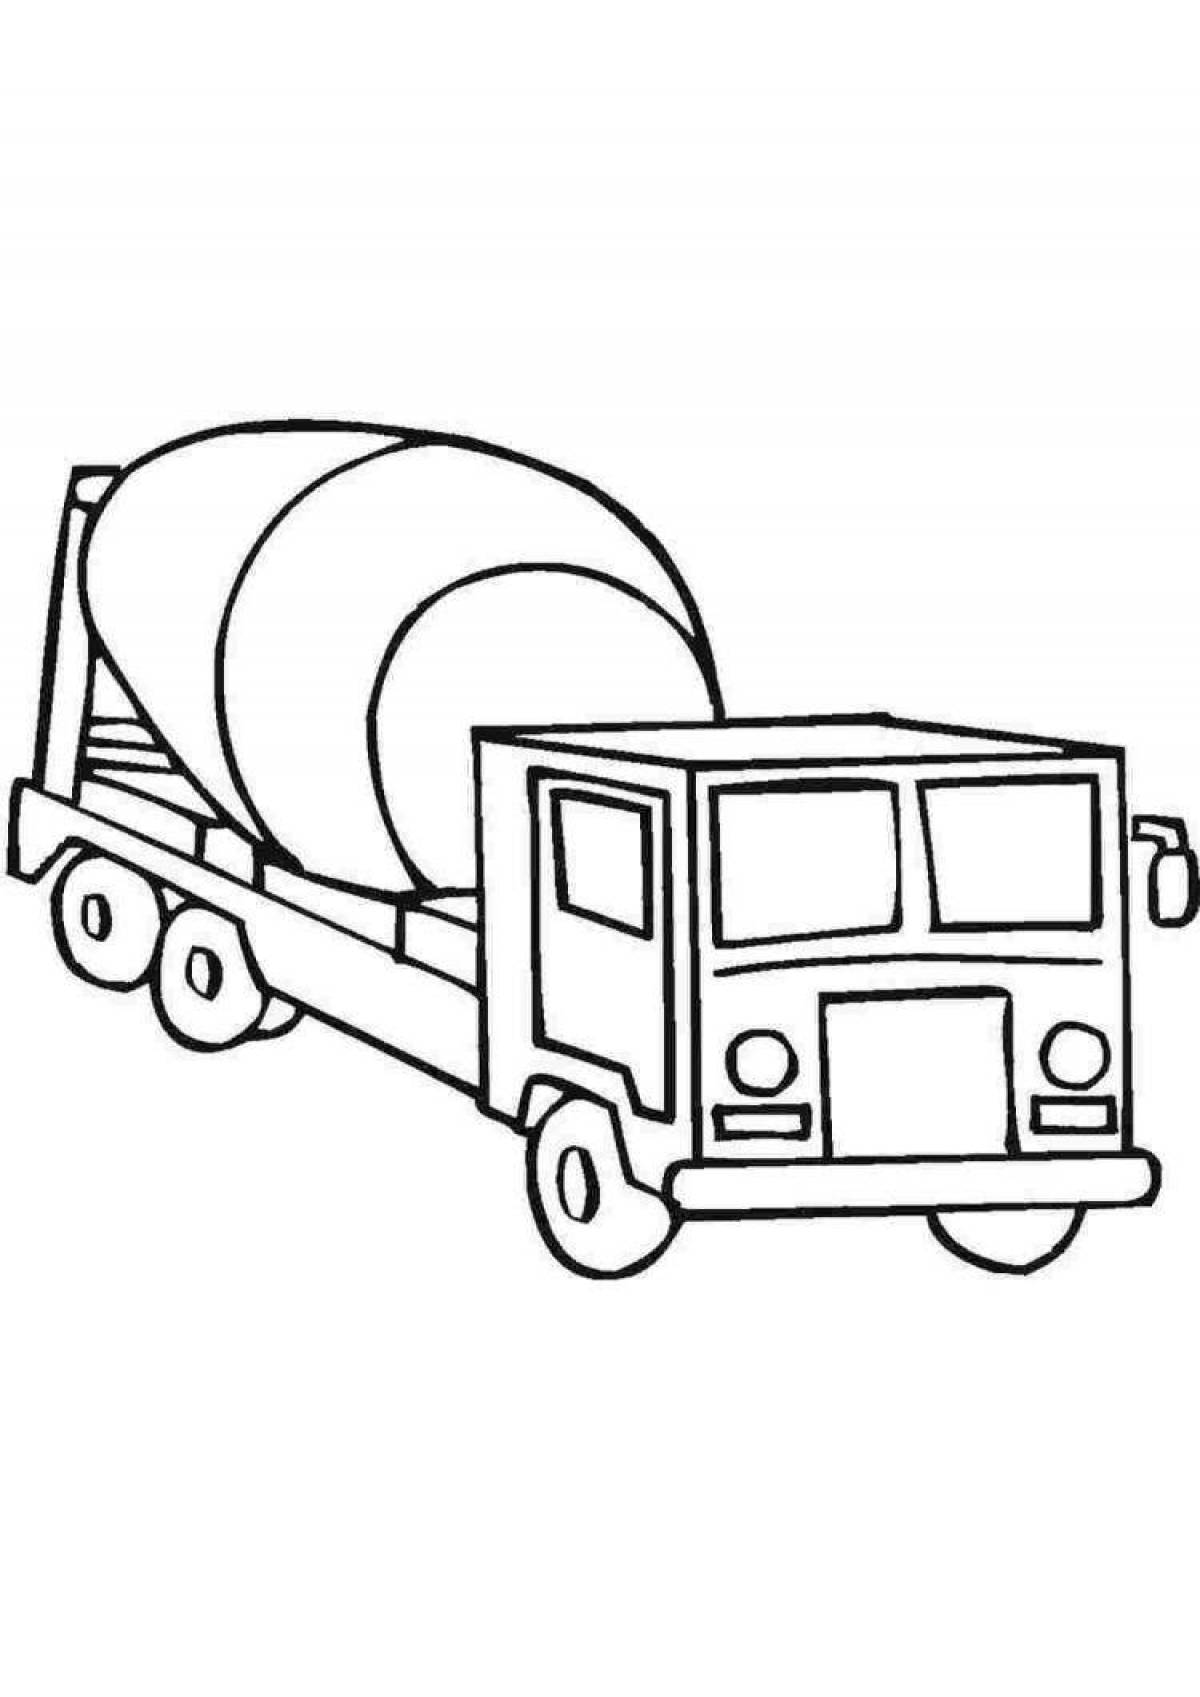 Amazing concrete mixer coloring book for kids